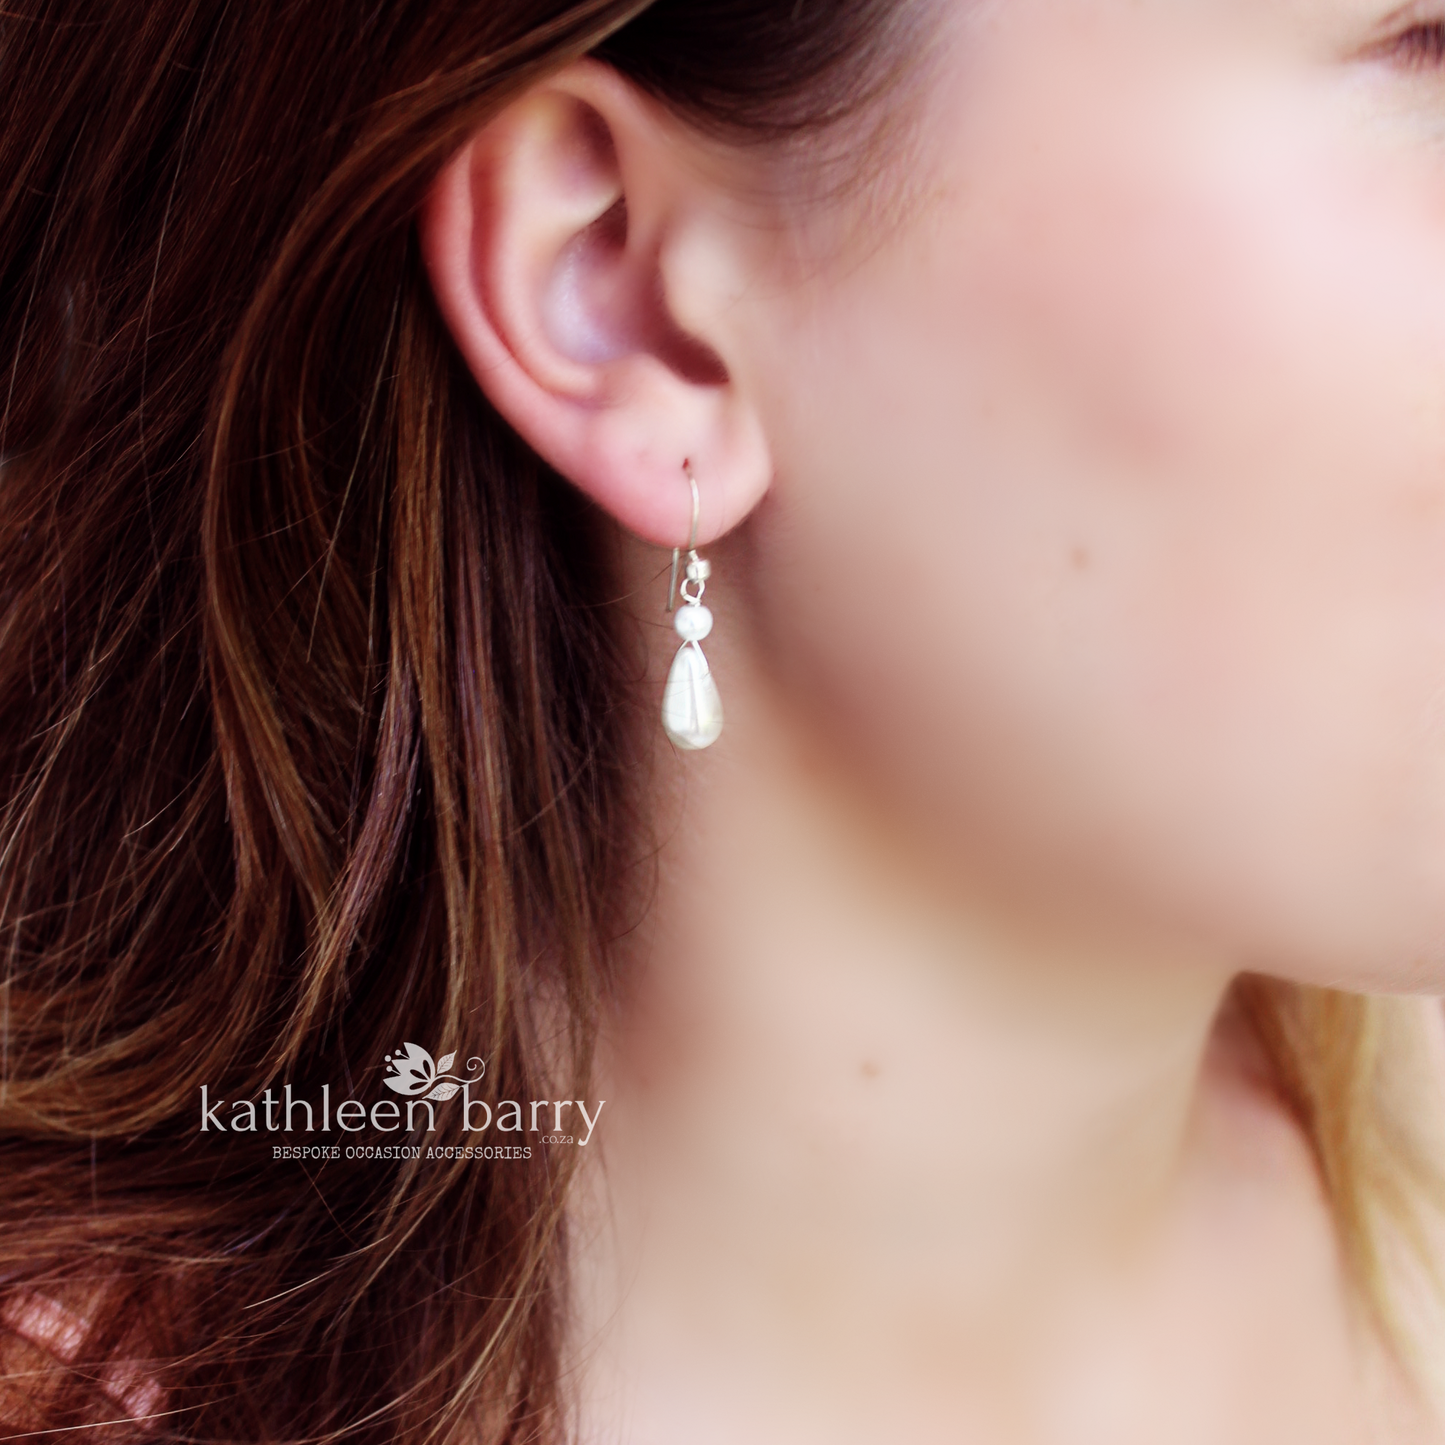 Jaclyn dainty pearl drop earrings - available in 3 pearl colors, rose gold, gold or silver finish